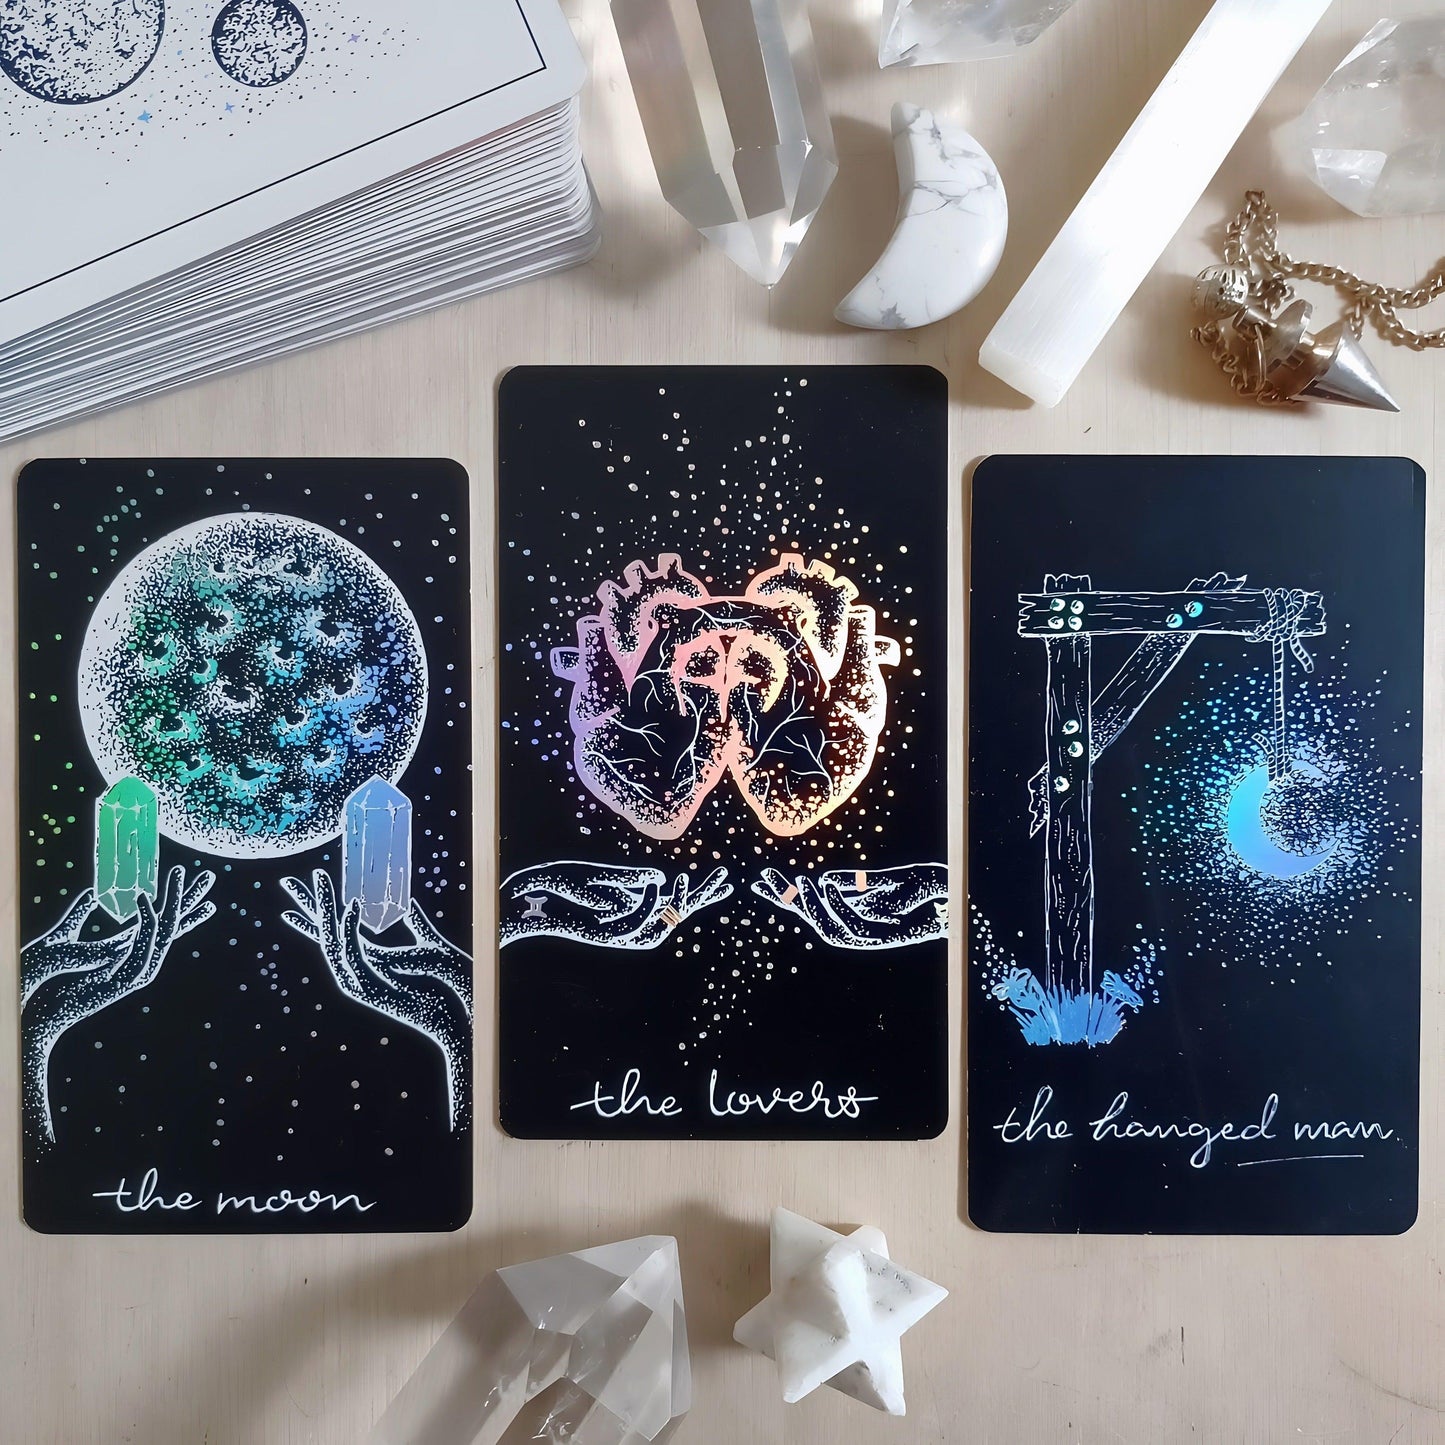 the hanged man, the lovers, the moon: three tarot cards from Midnight Sky indie deck